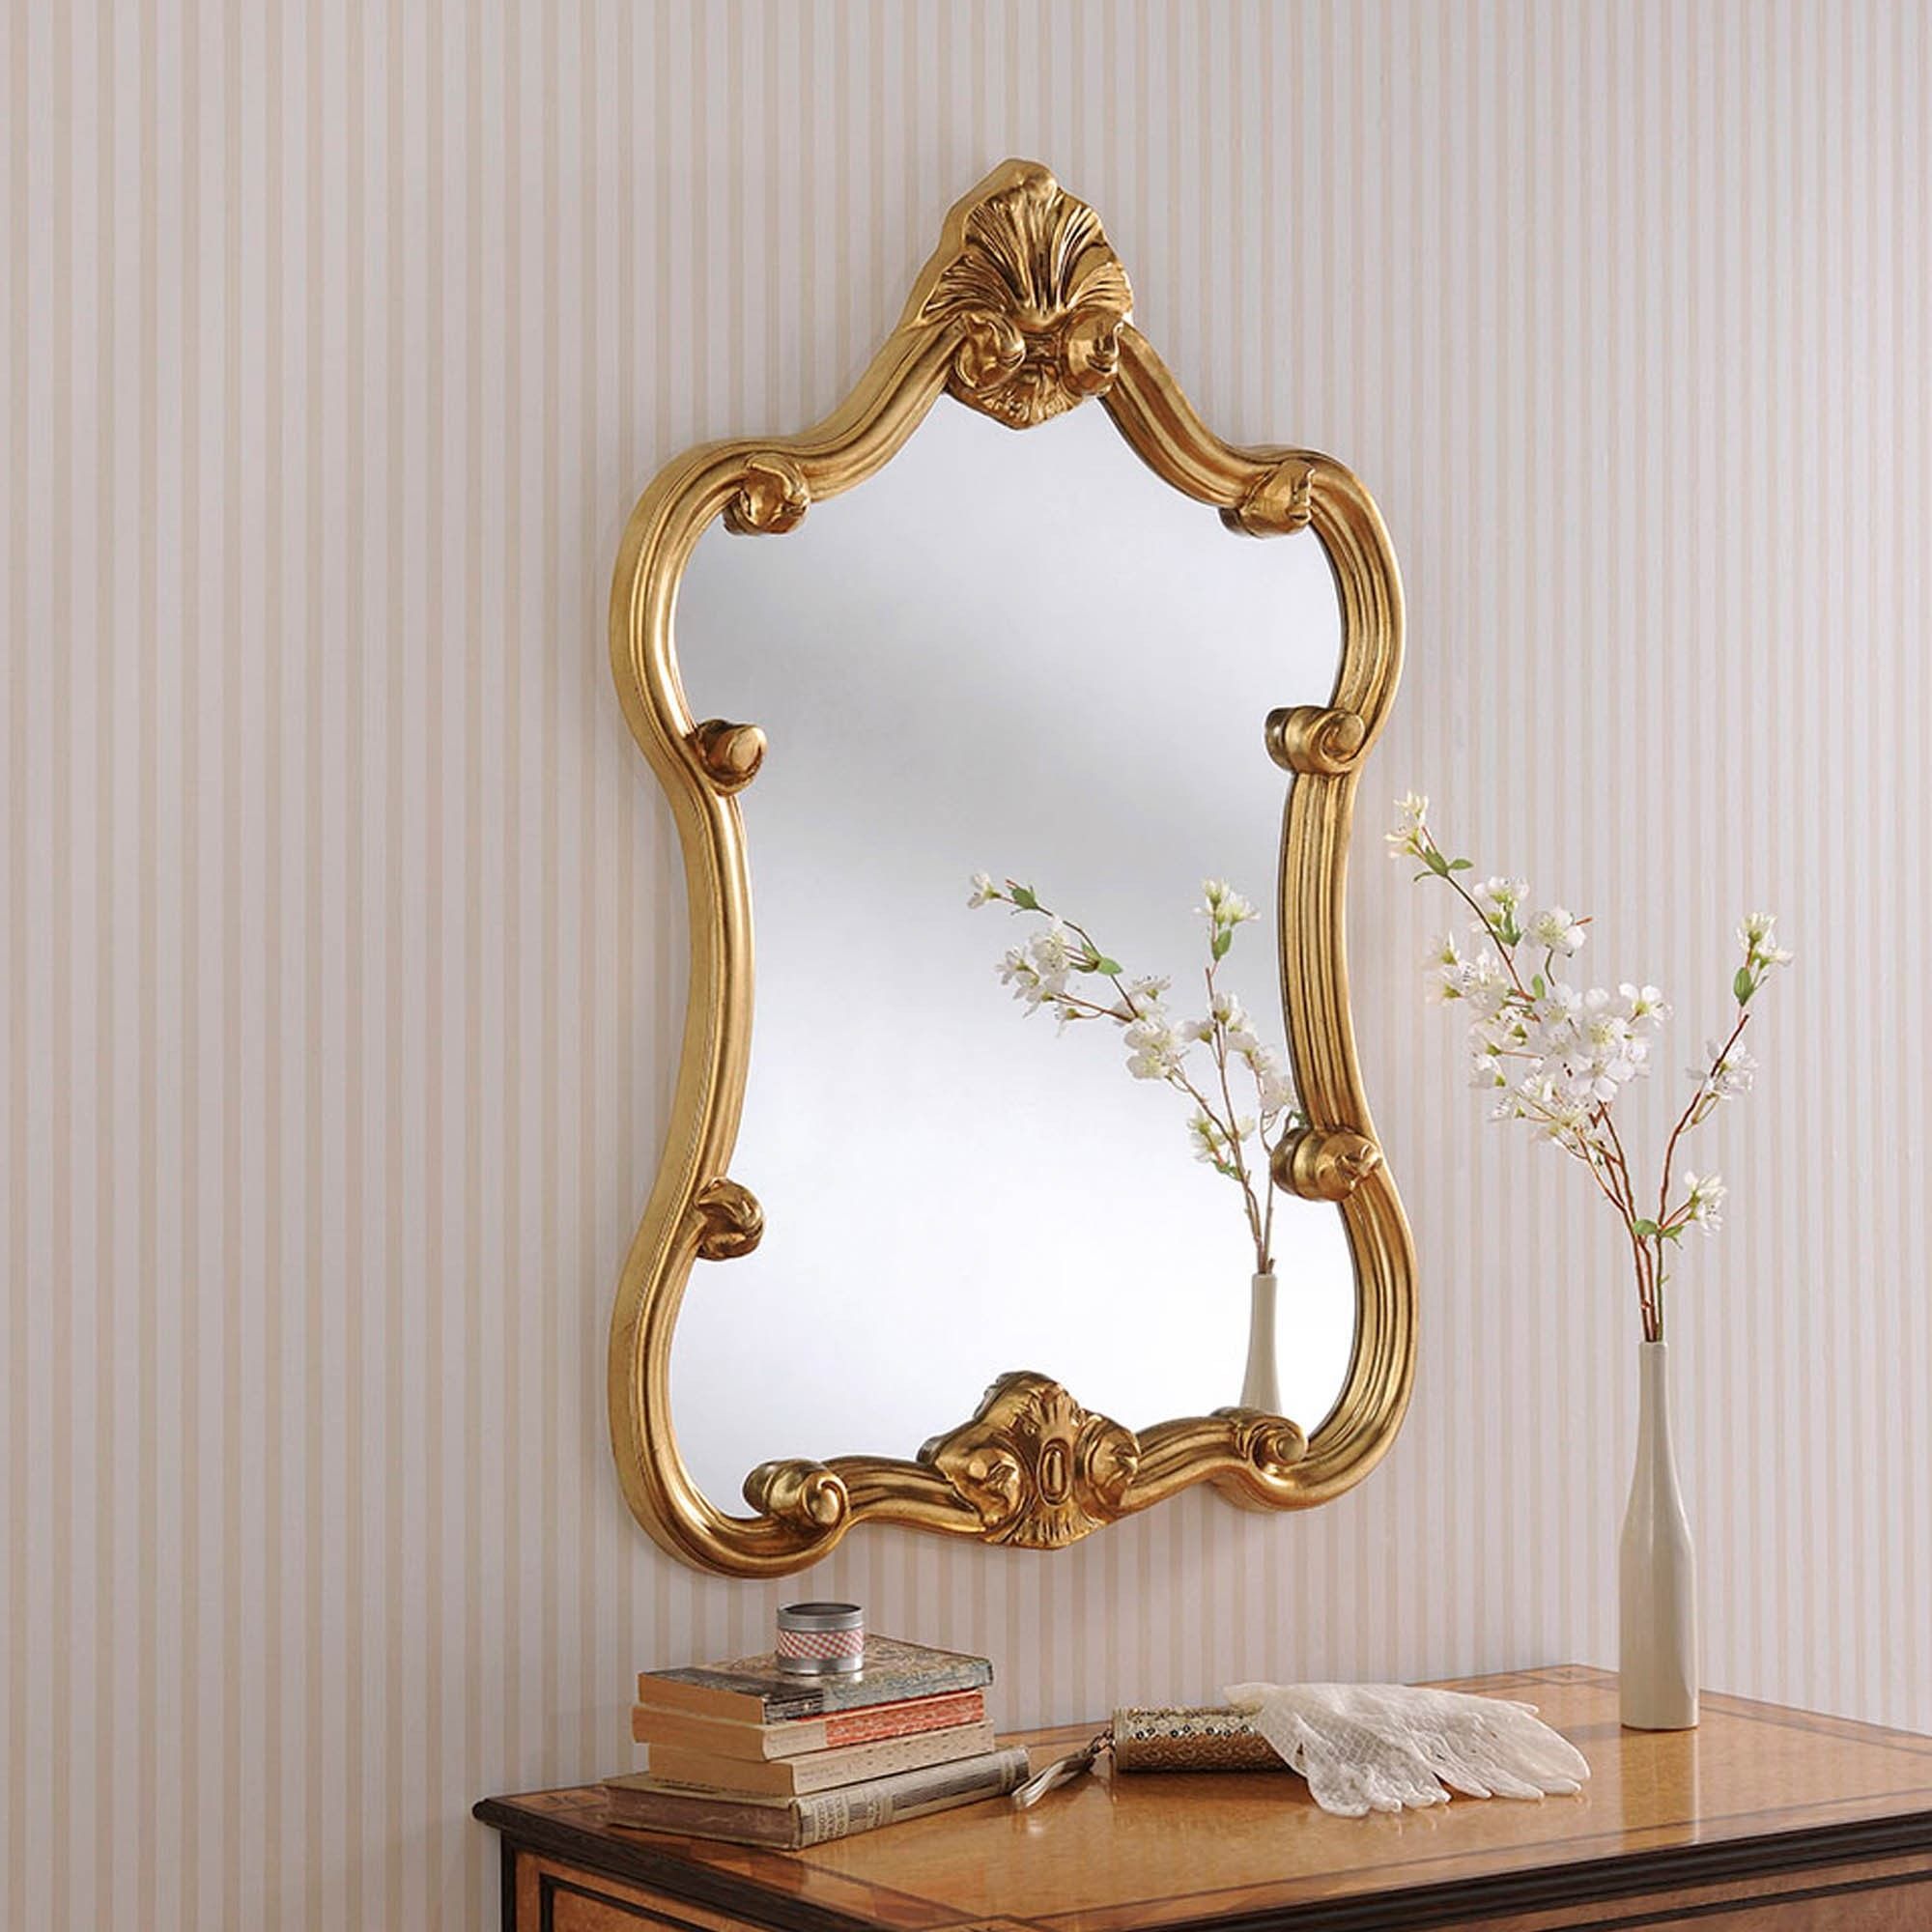 Decorative Gold Ornate Wall Mirror | Wall Mirrors Inside Wall Mirrors (View 15 of 15)